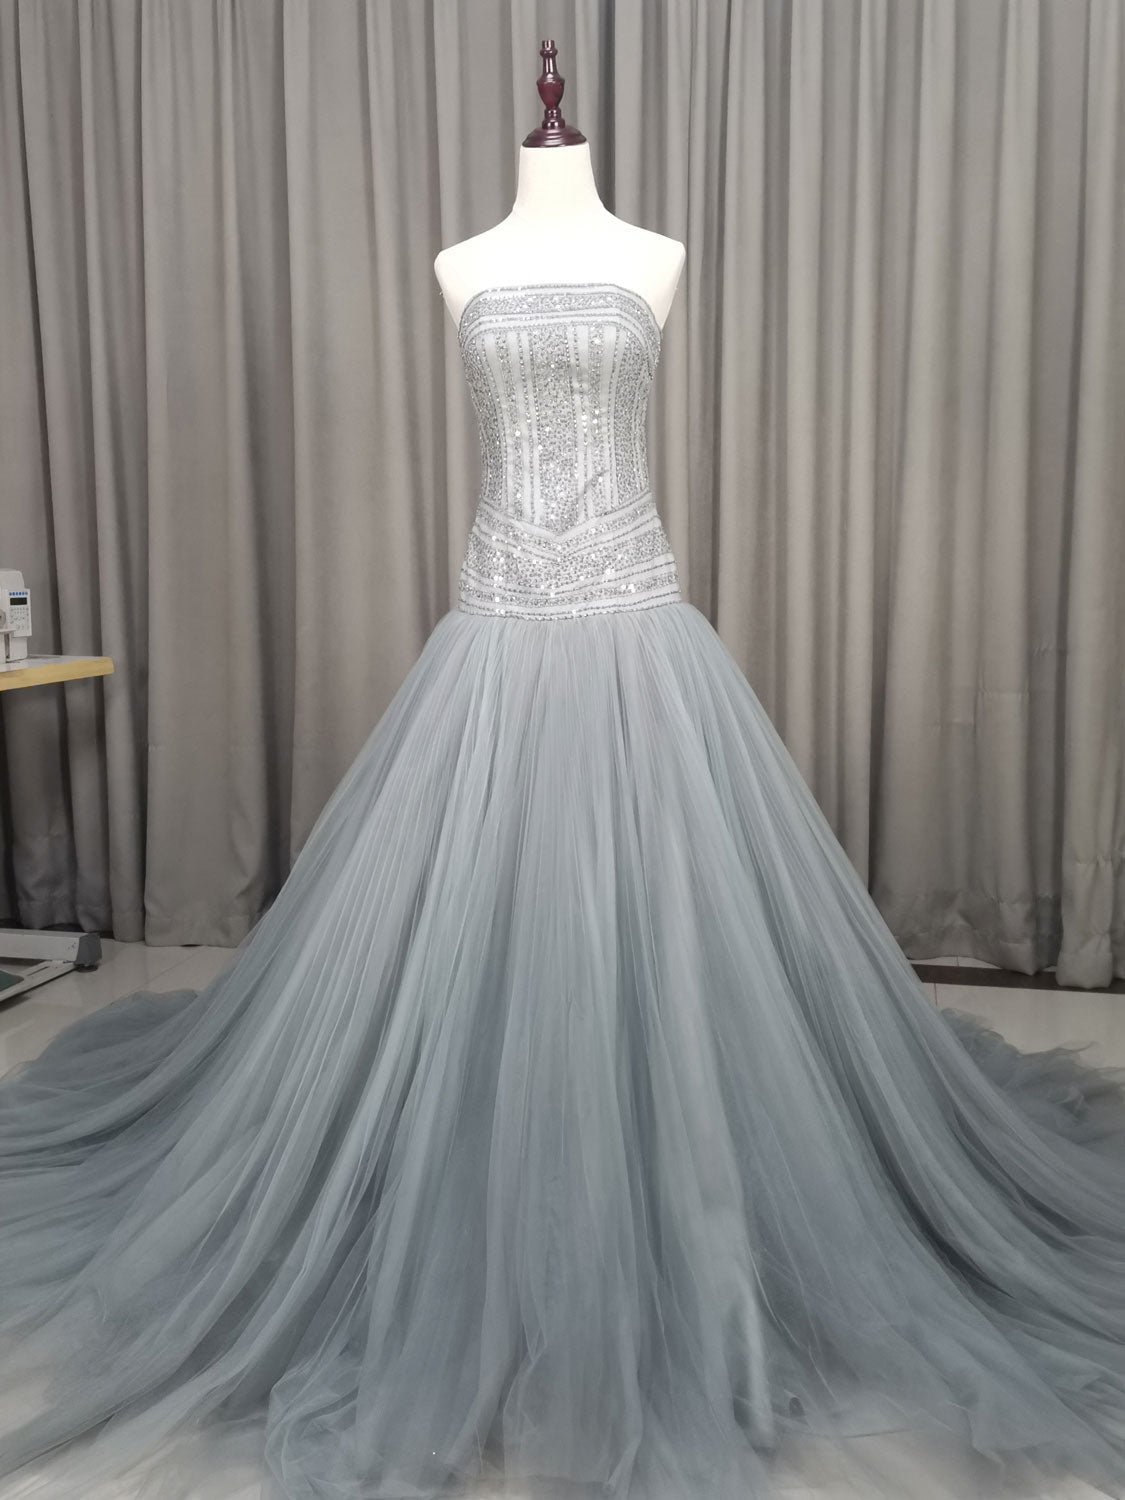 Gray Tulle Beads Long Prom Dress Outfits For Women Gray Tulle Formal Evening Graduation Dresses